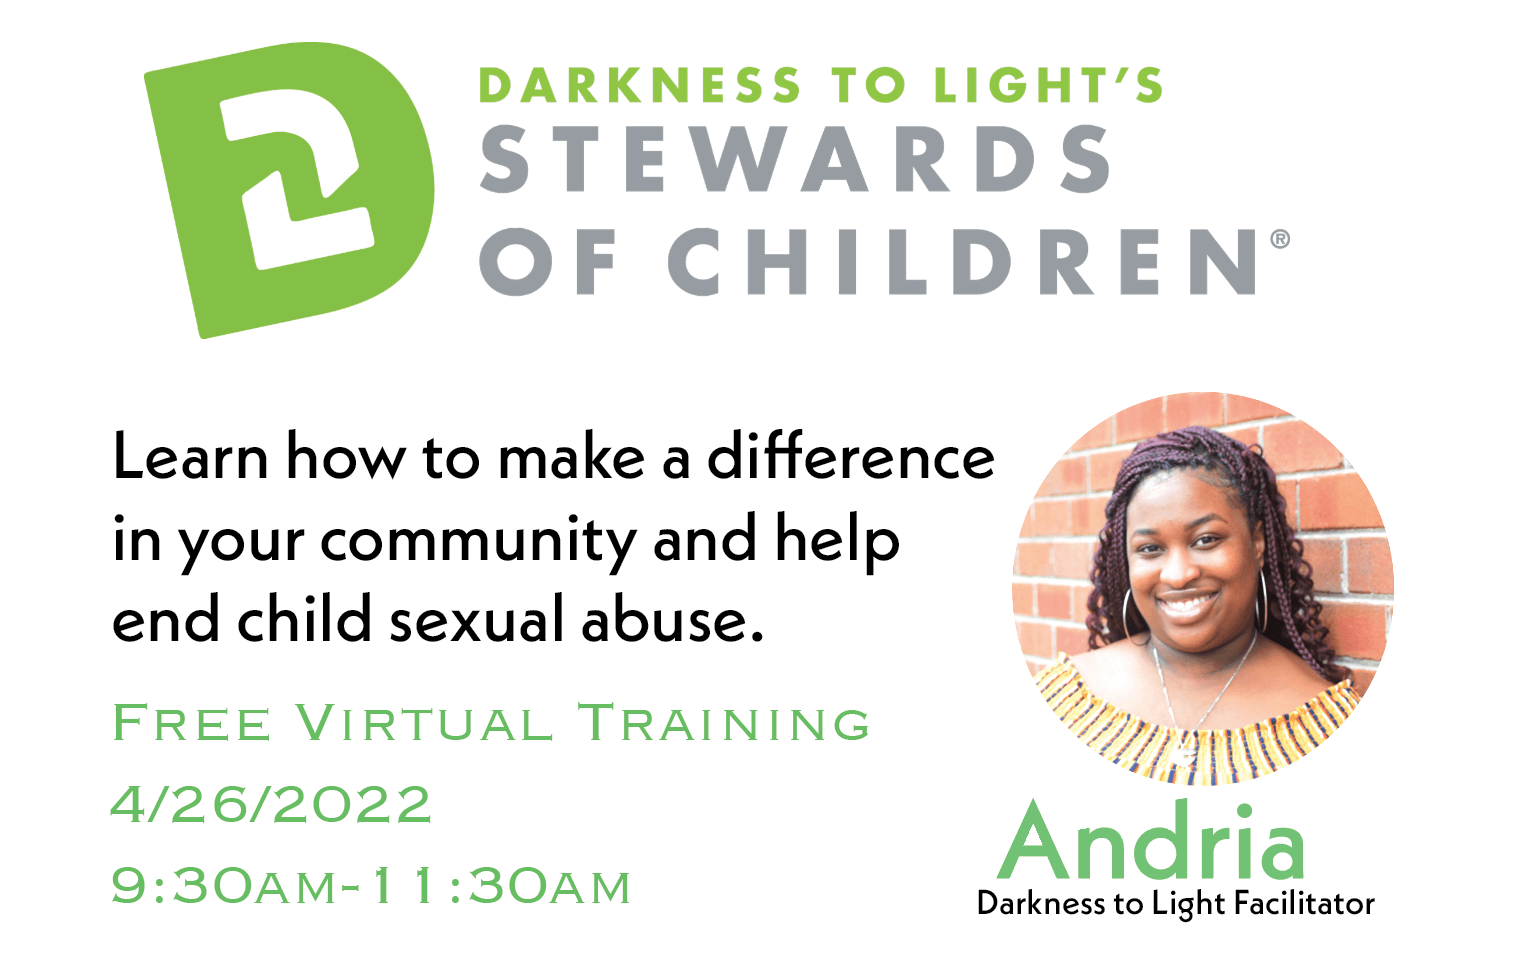 Learn how to make a difference in your community and help end child sexual abuse. 